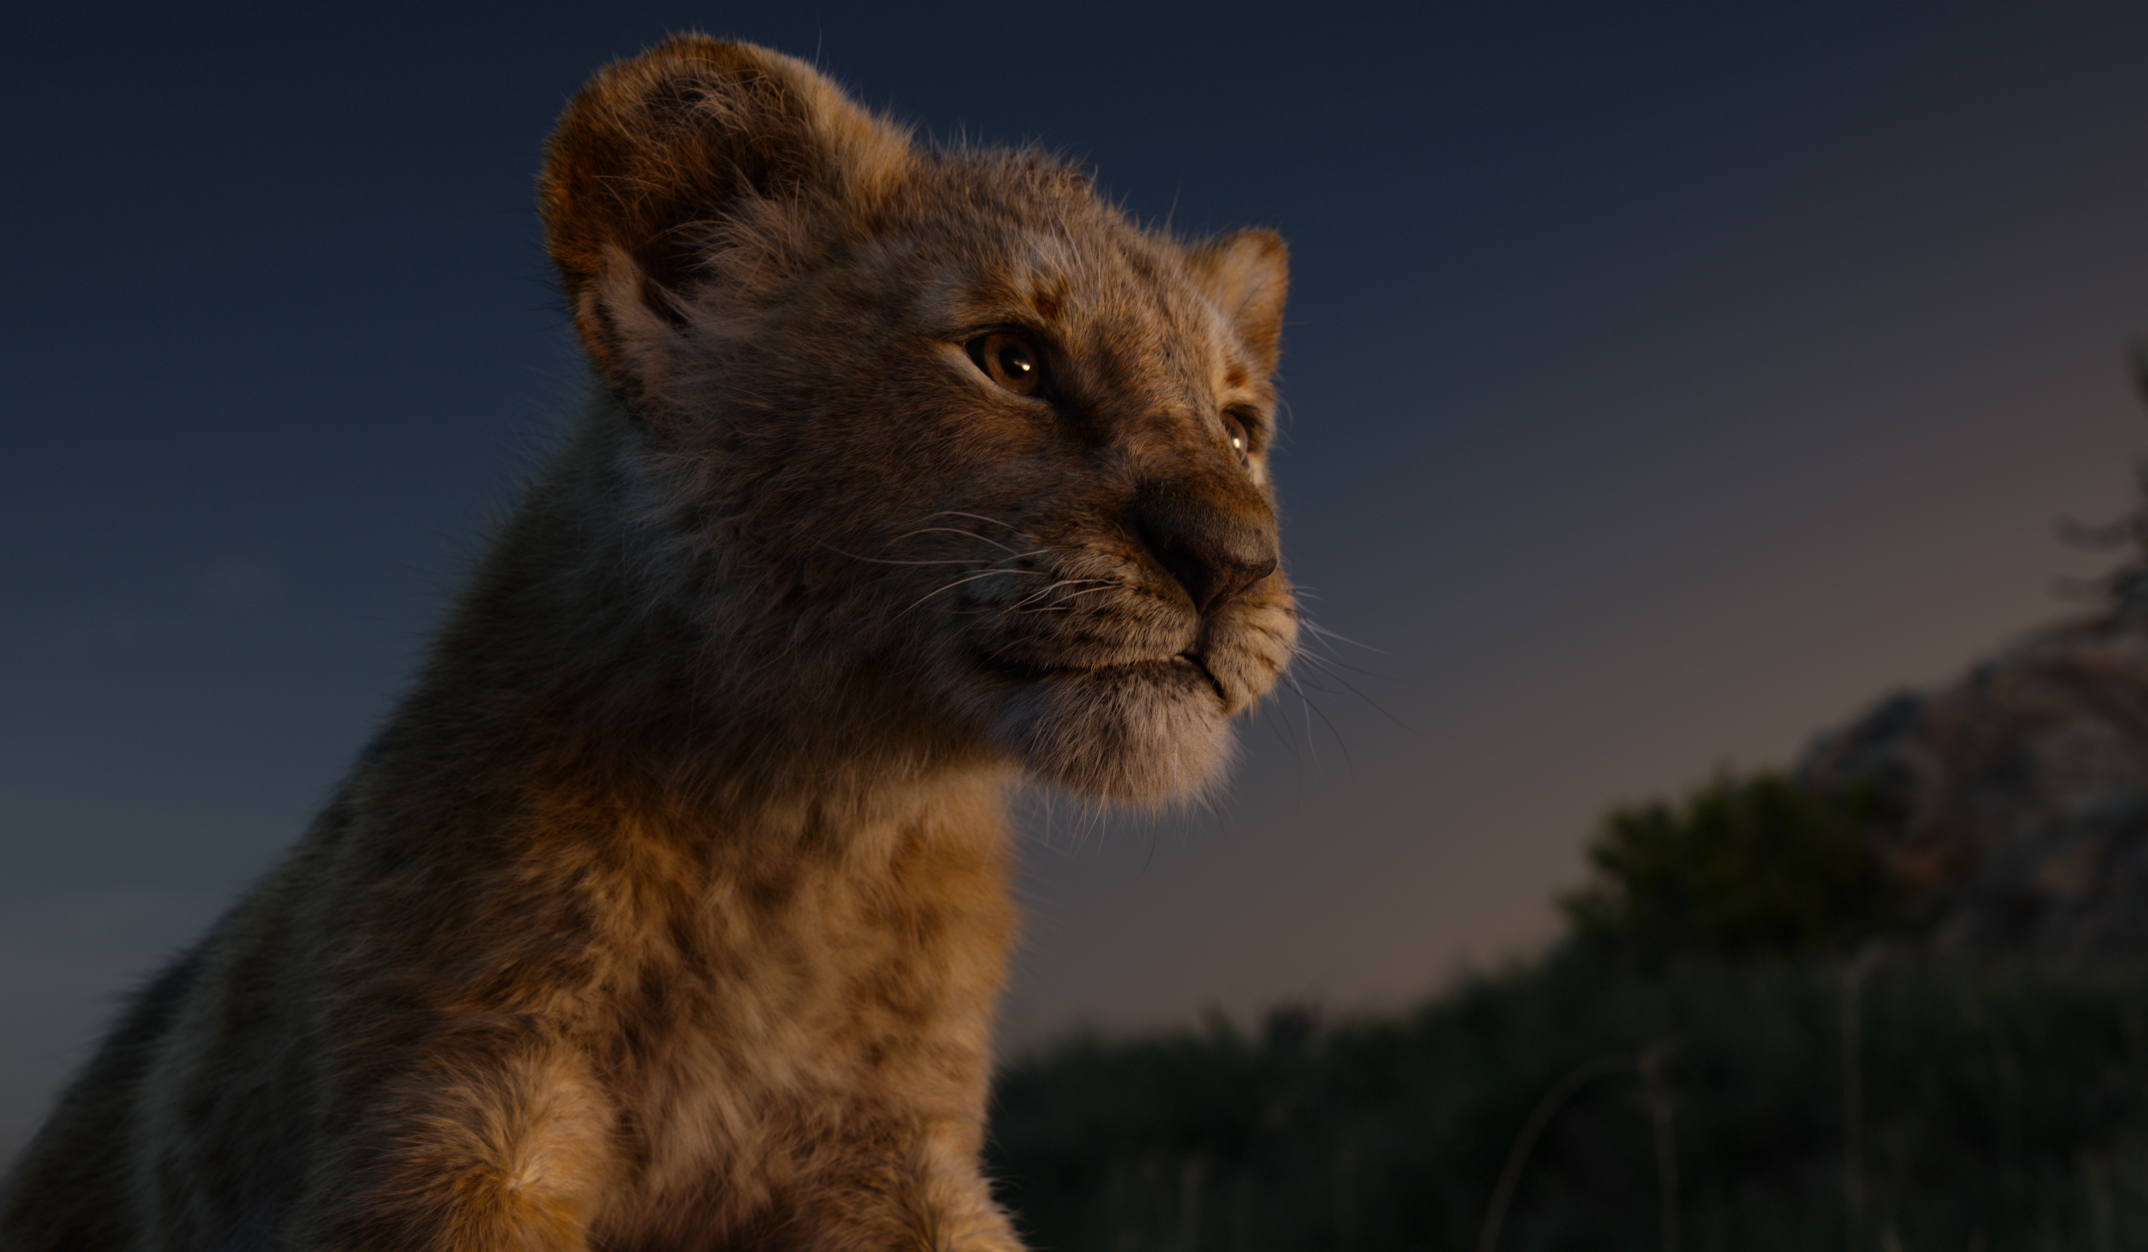 Movie The Lion King (2019) HD Wallpaper | Background Image